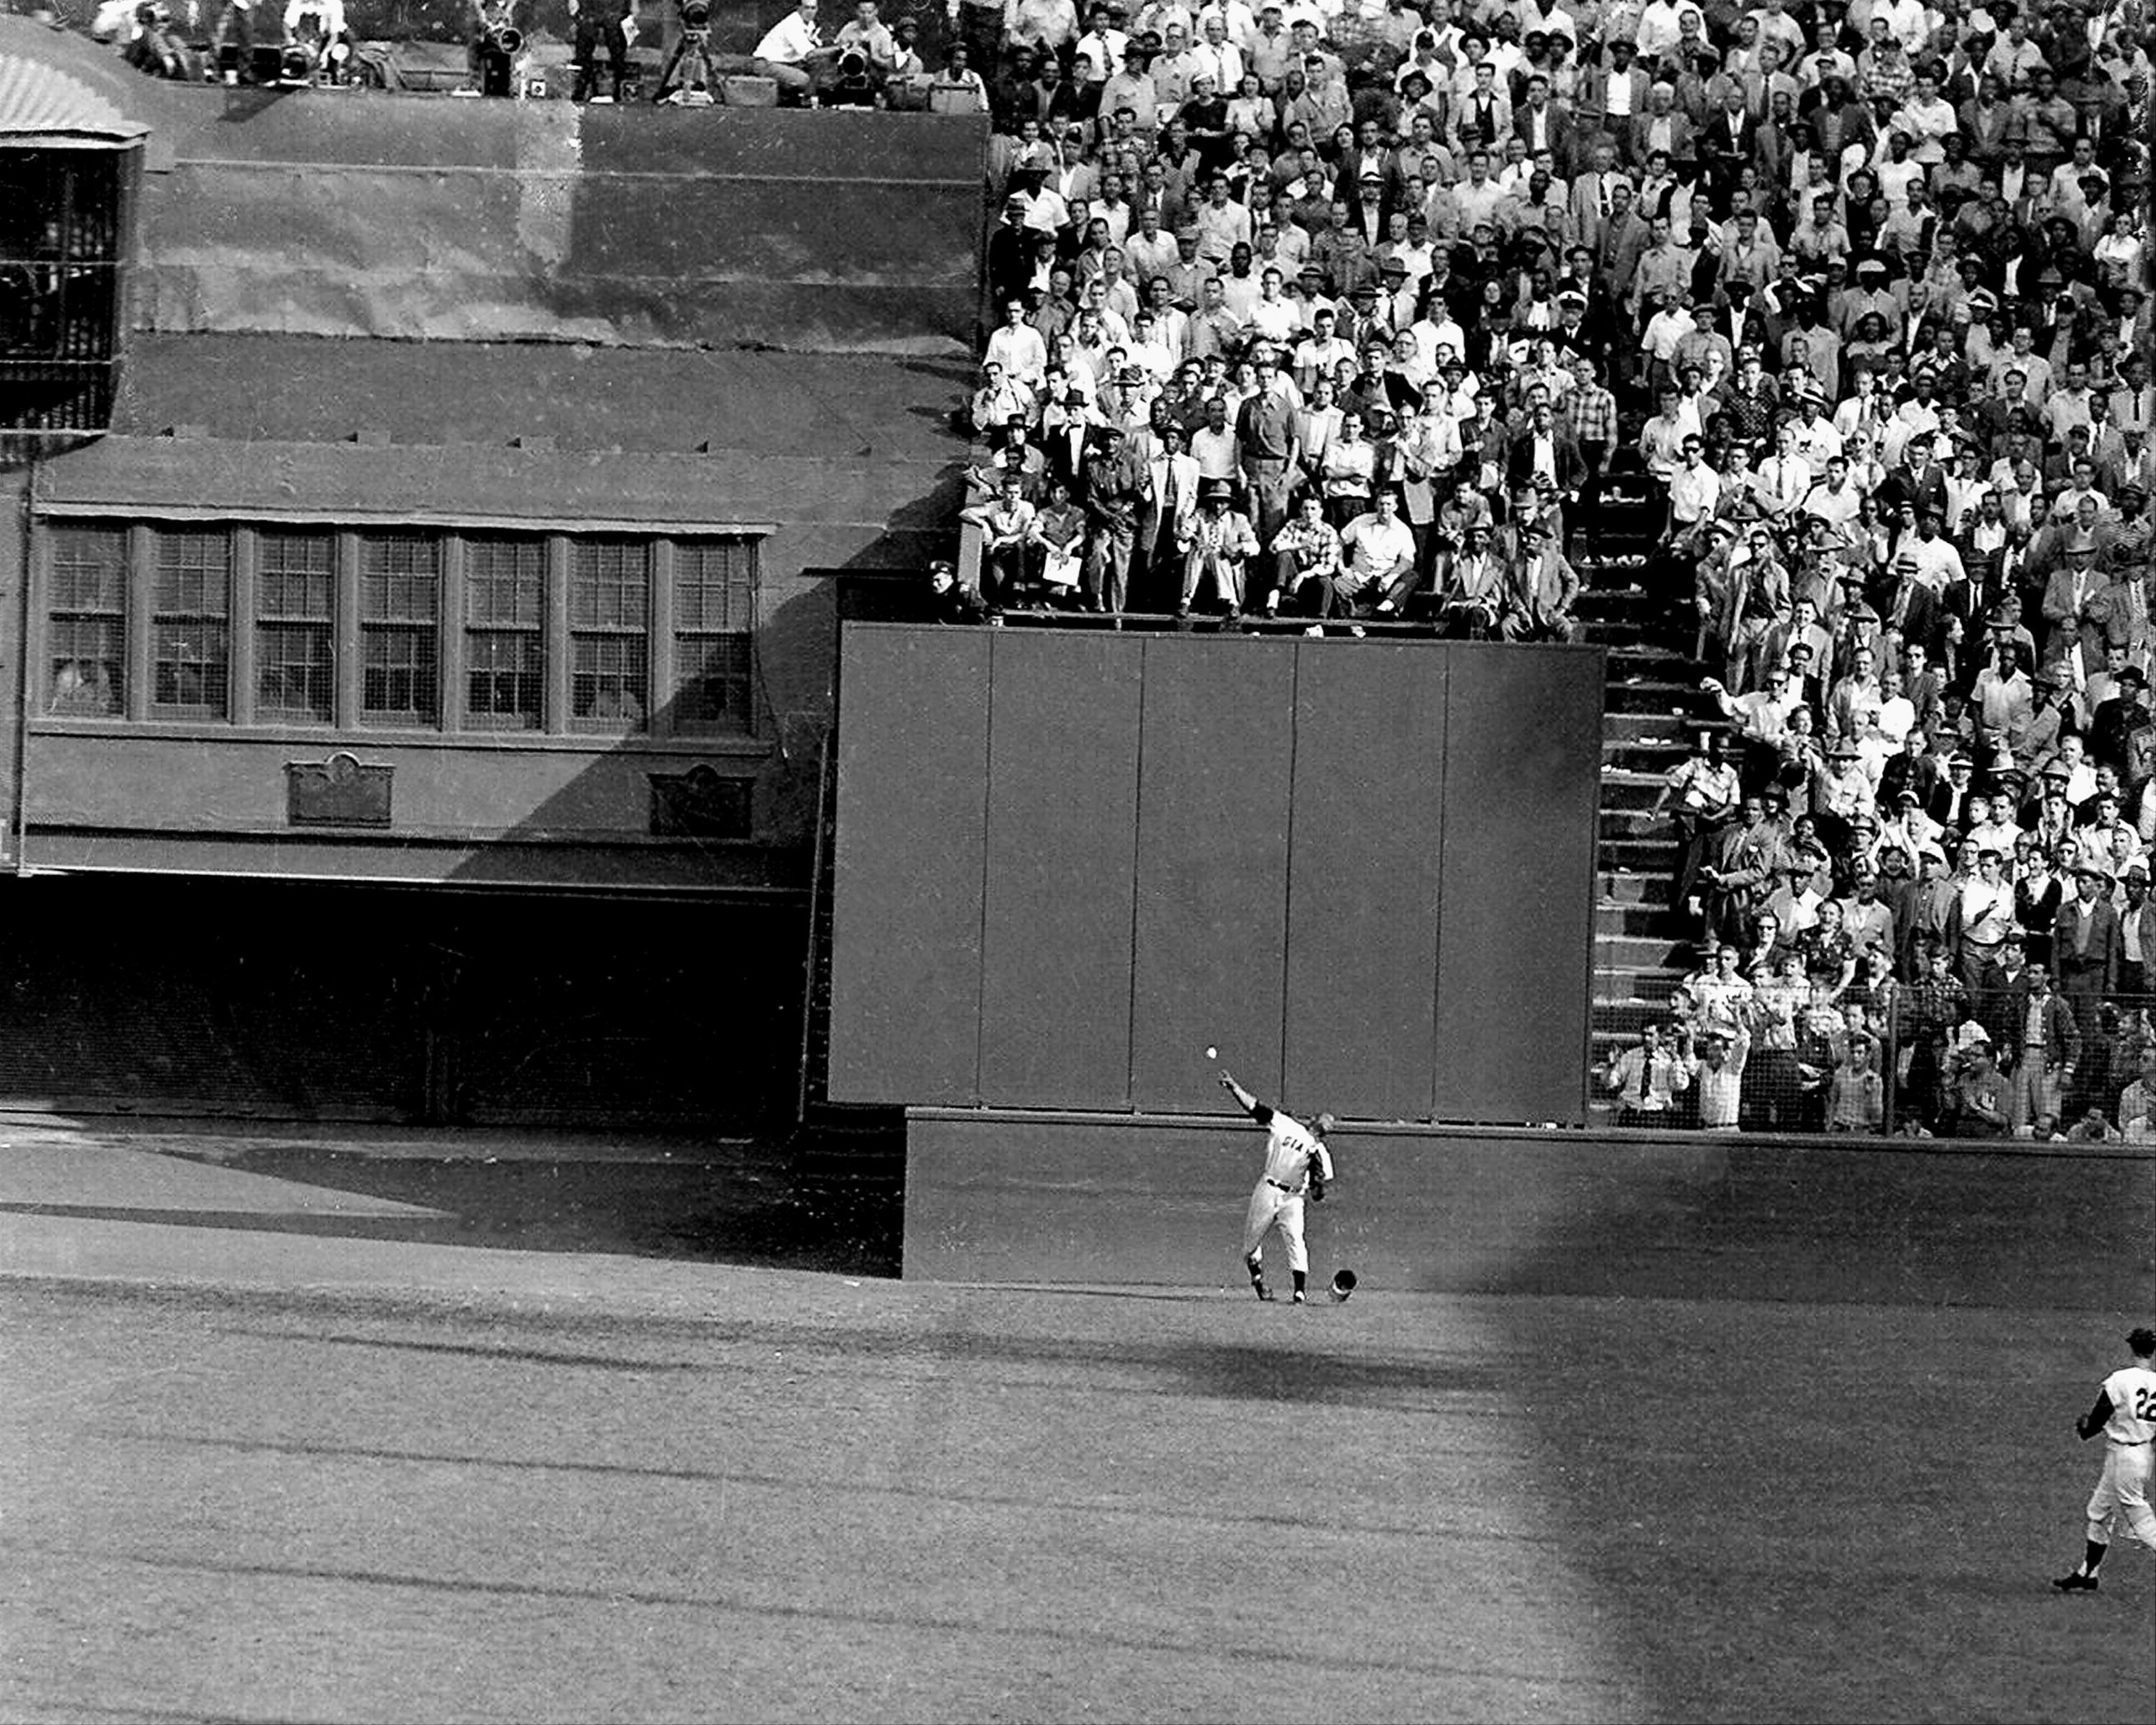 PHOTO: New York Giants, Willie Mays famous catch in the 1954 World Series made in the Polo Grounds against Vic Wertz of the Cleveland Indians.